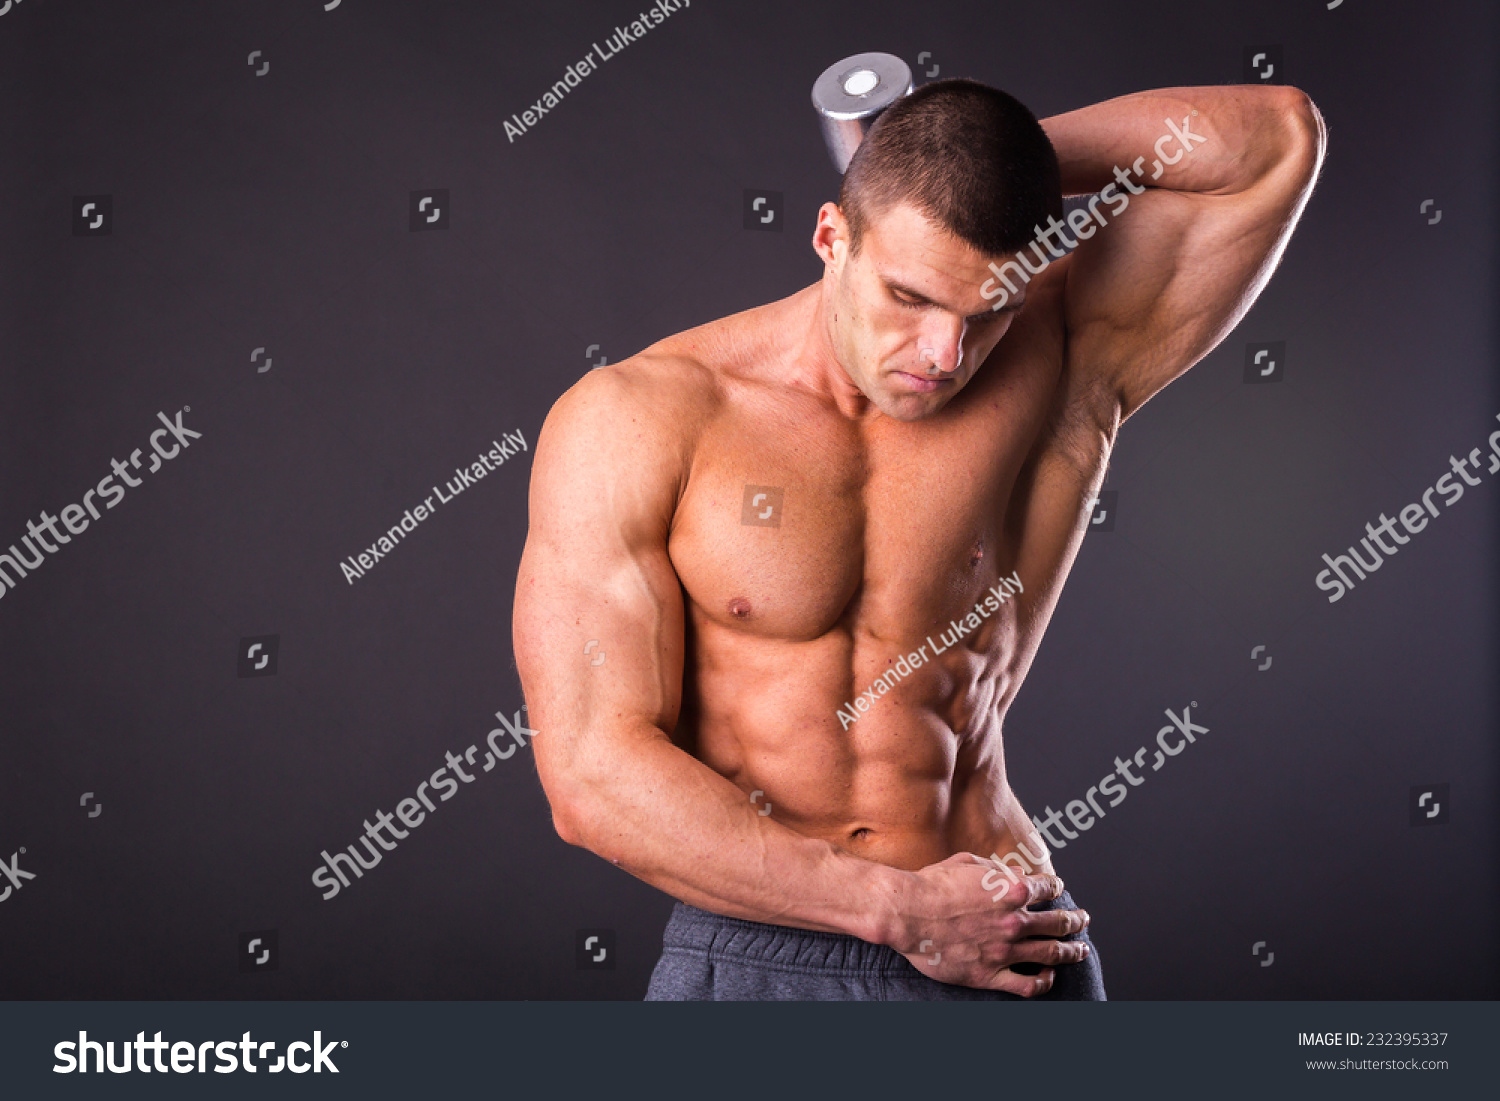 Strong Man Bodybuilder Posing On Gray Stock Photo Edit Now 232395337 Images, Photos, Reviews